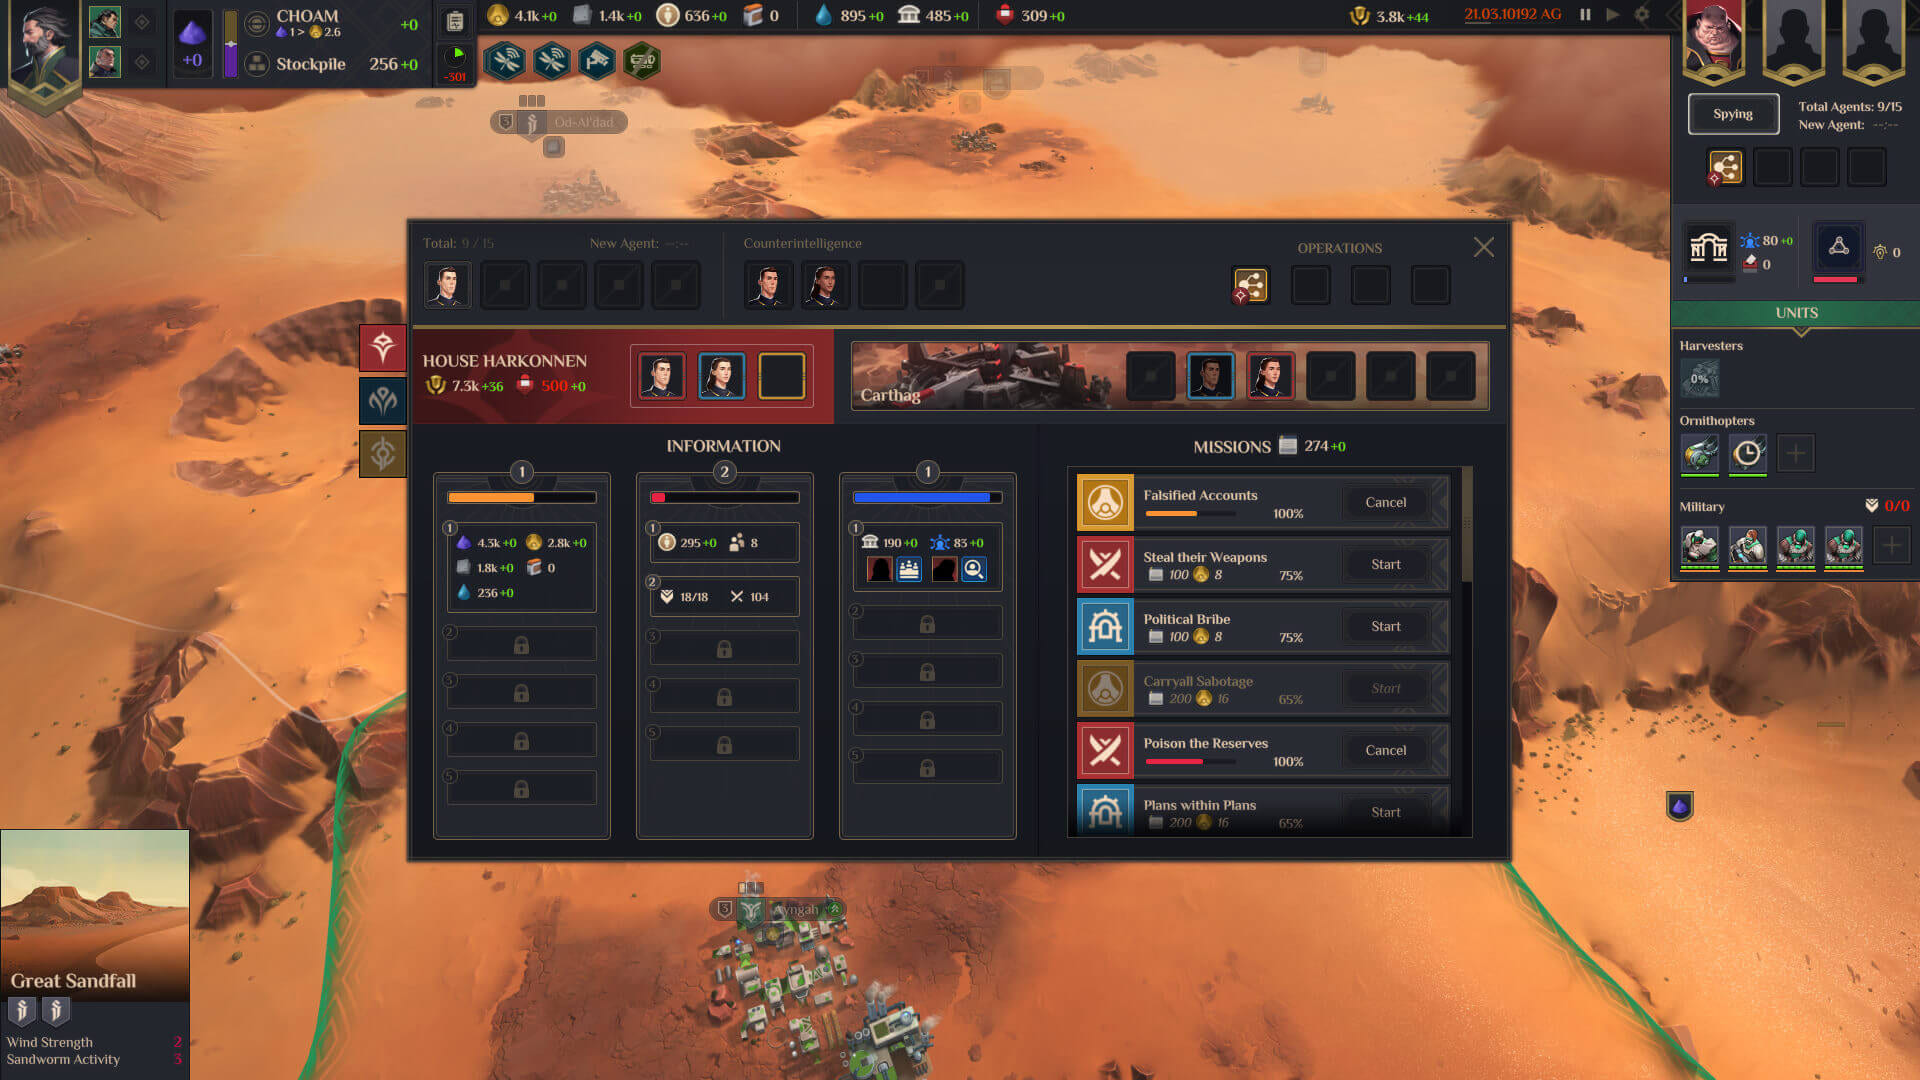 Dune: Spice Wars Spying Interface